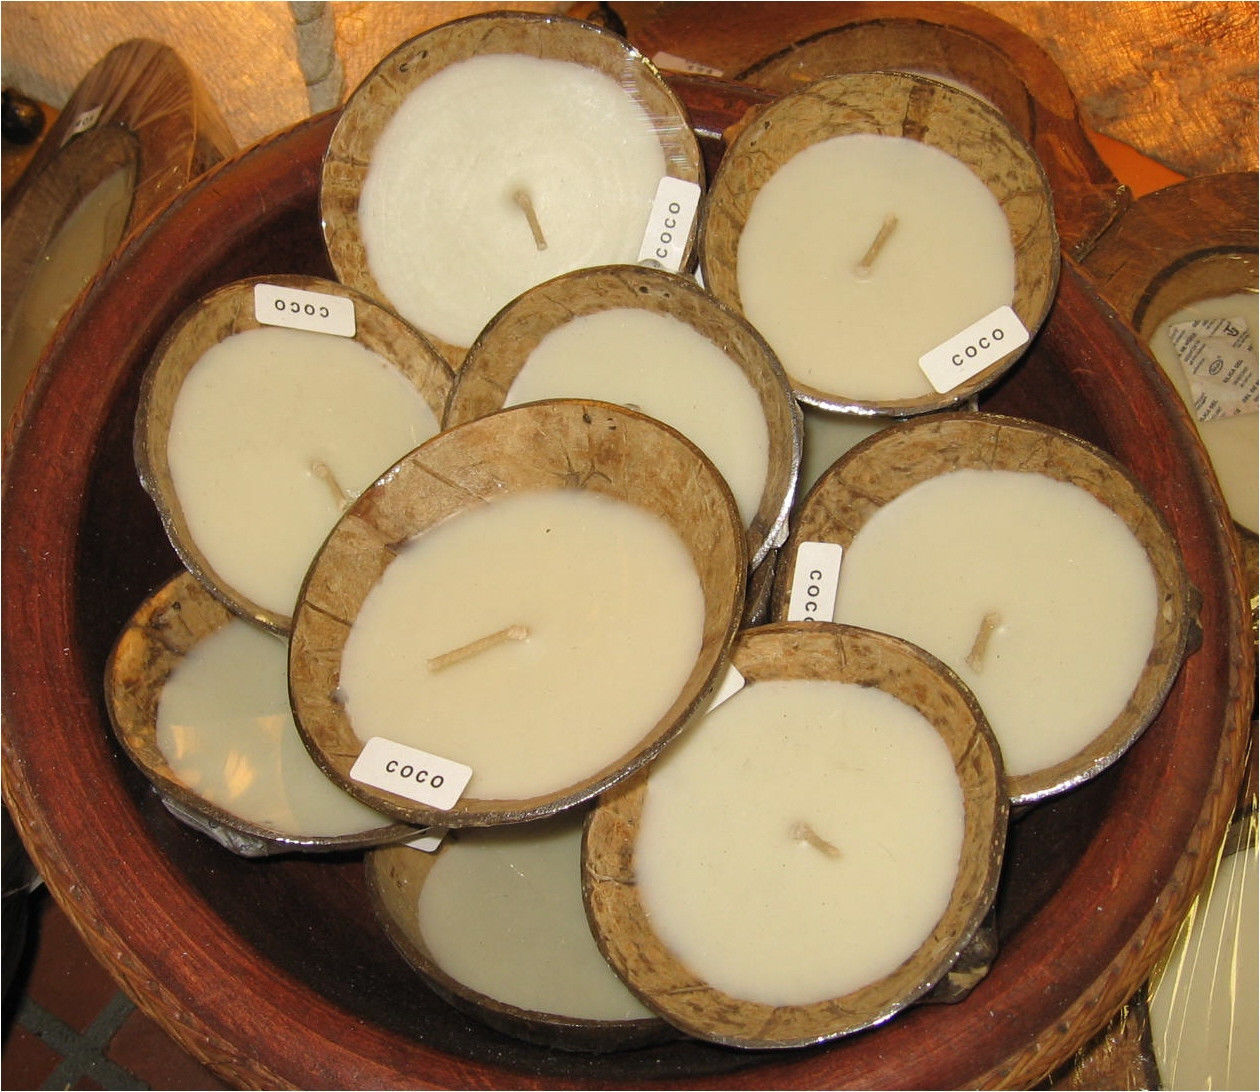 Real Coconut Candle - Hand Crafted Light Coconut Scent - $8.50